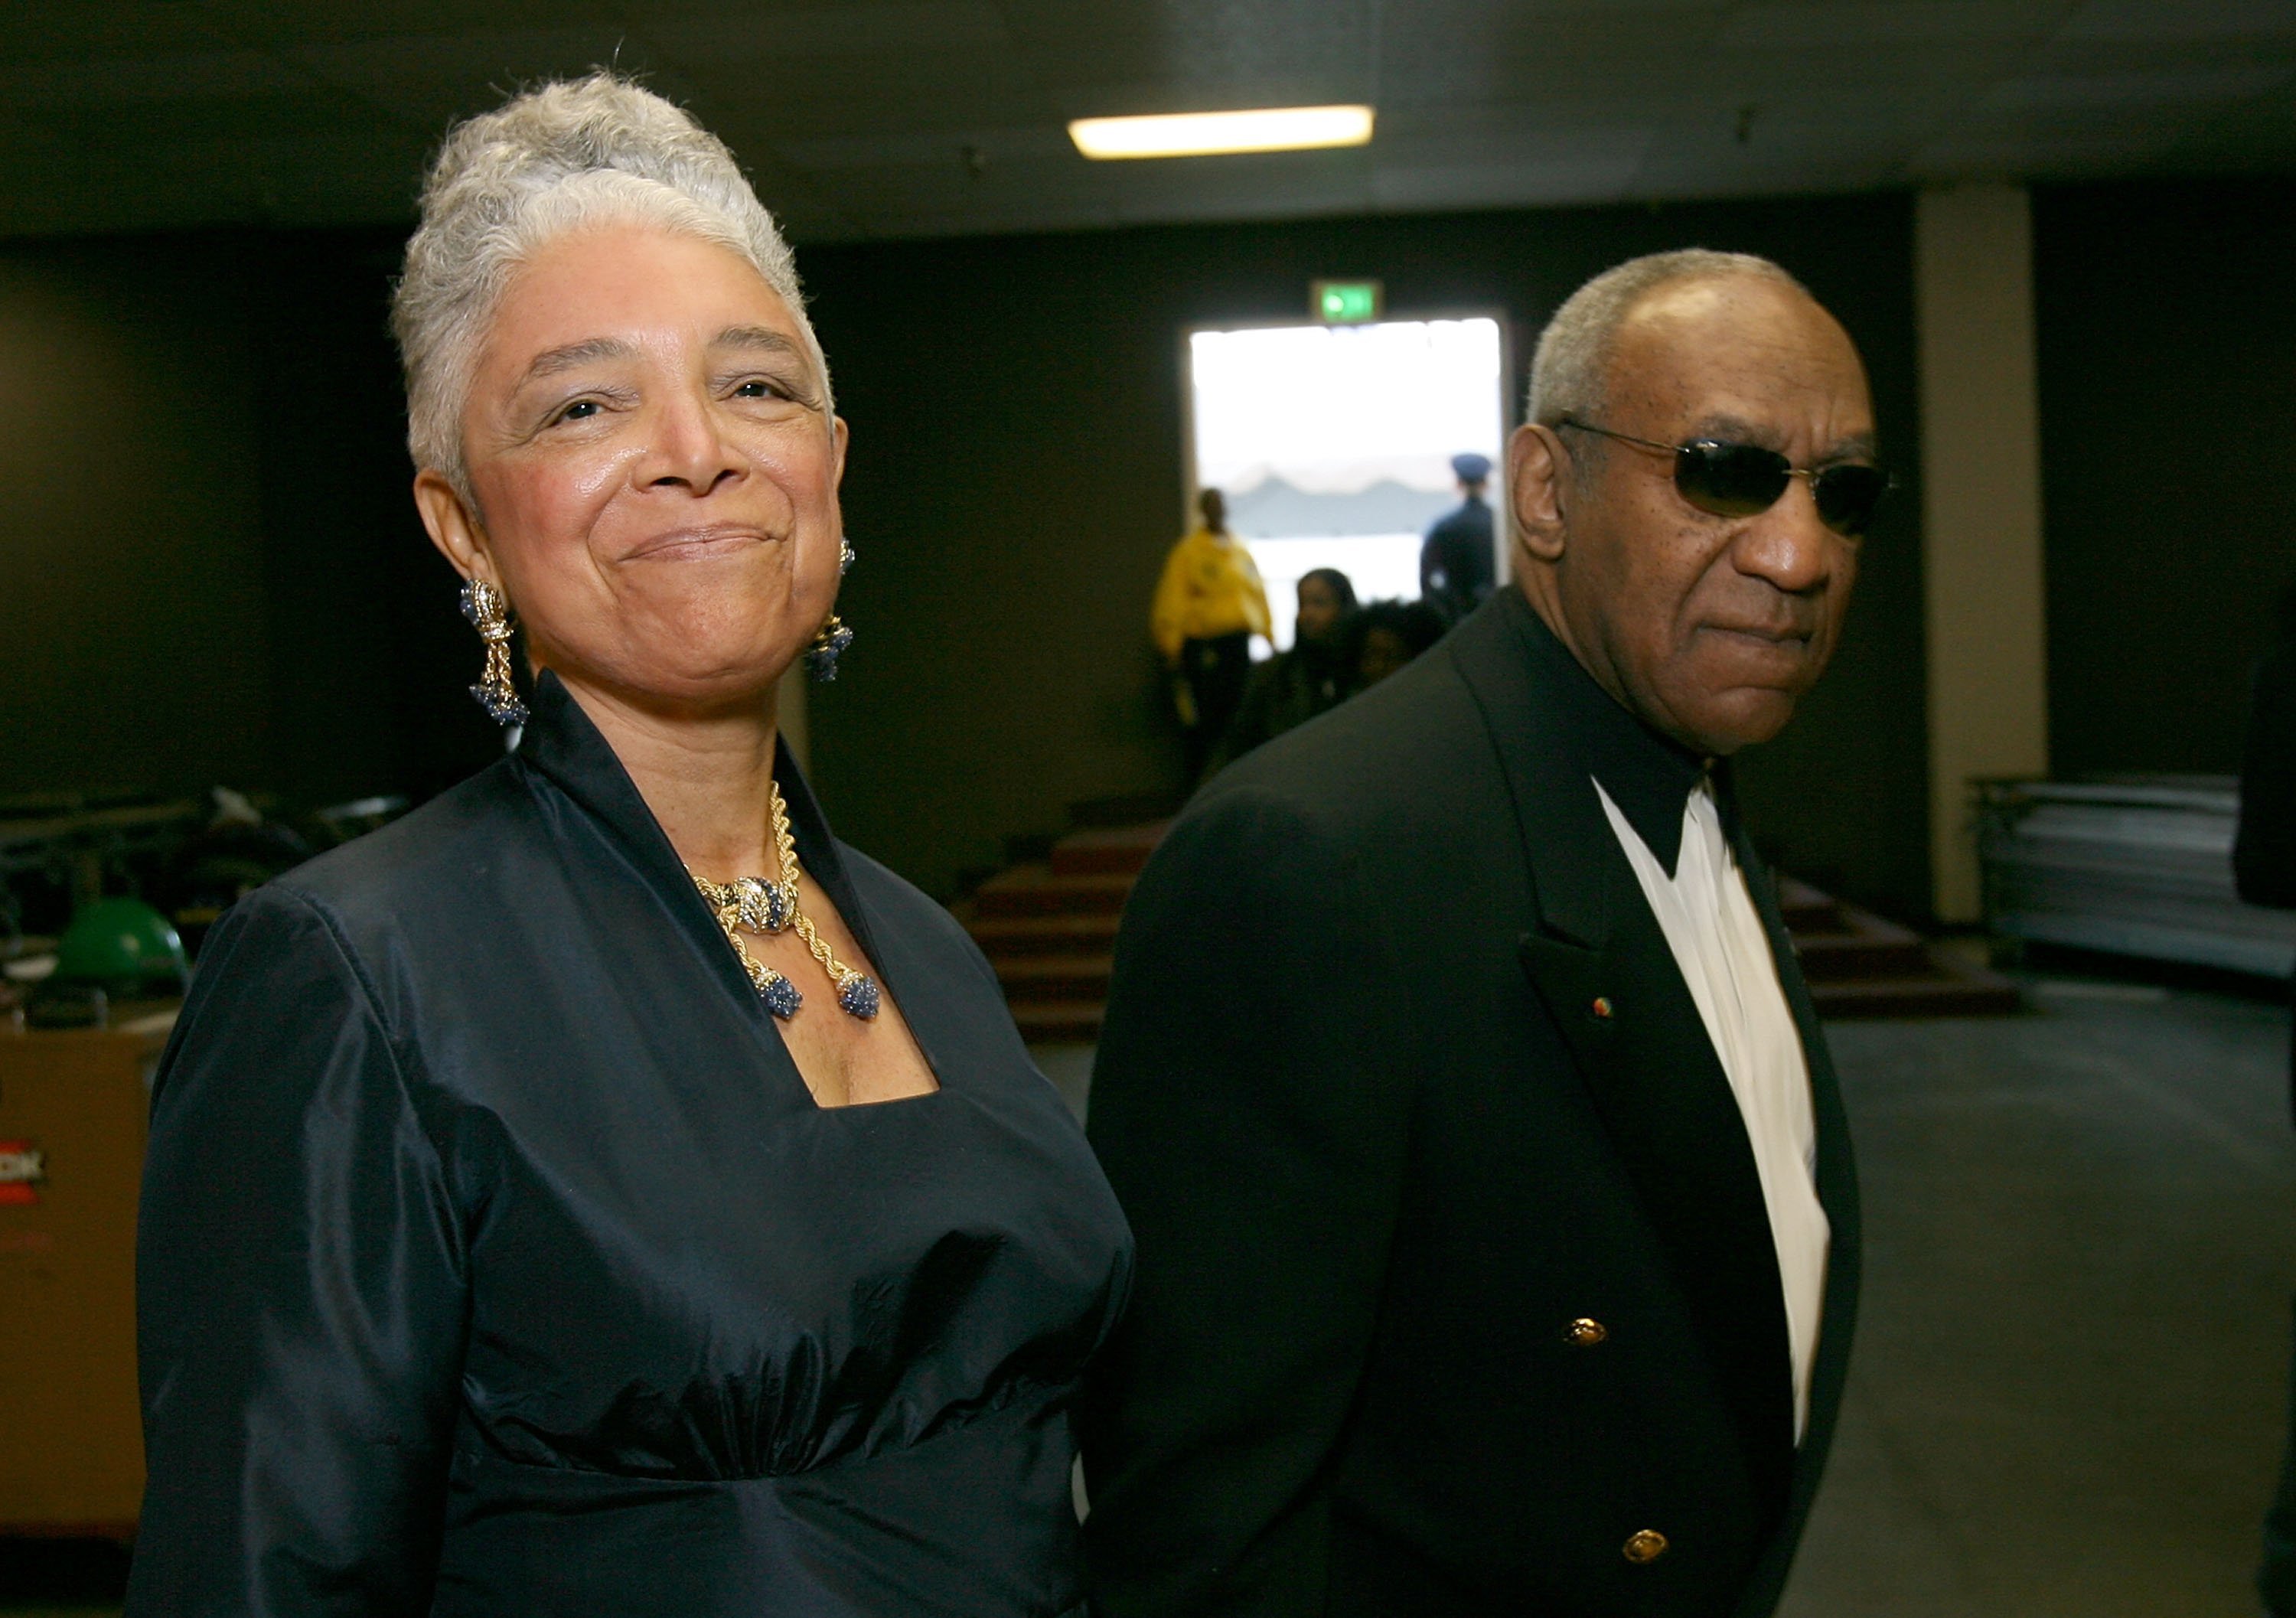 Comedian Bill Cosby and wife Camille O. Cosby walk backstage during the 38th annual NAACP Image Awards held at the Shrine Auditorium on March 2, 2007, in Los Angeles, California. | Source: Getty Images